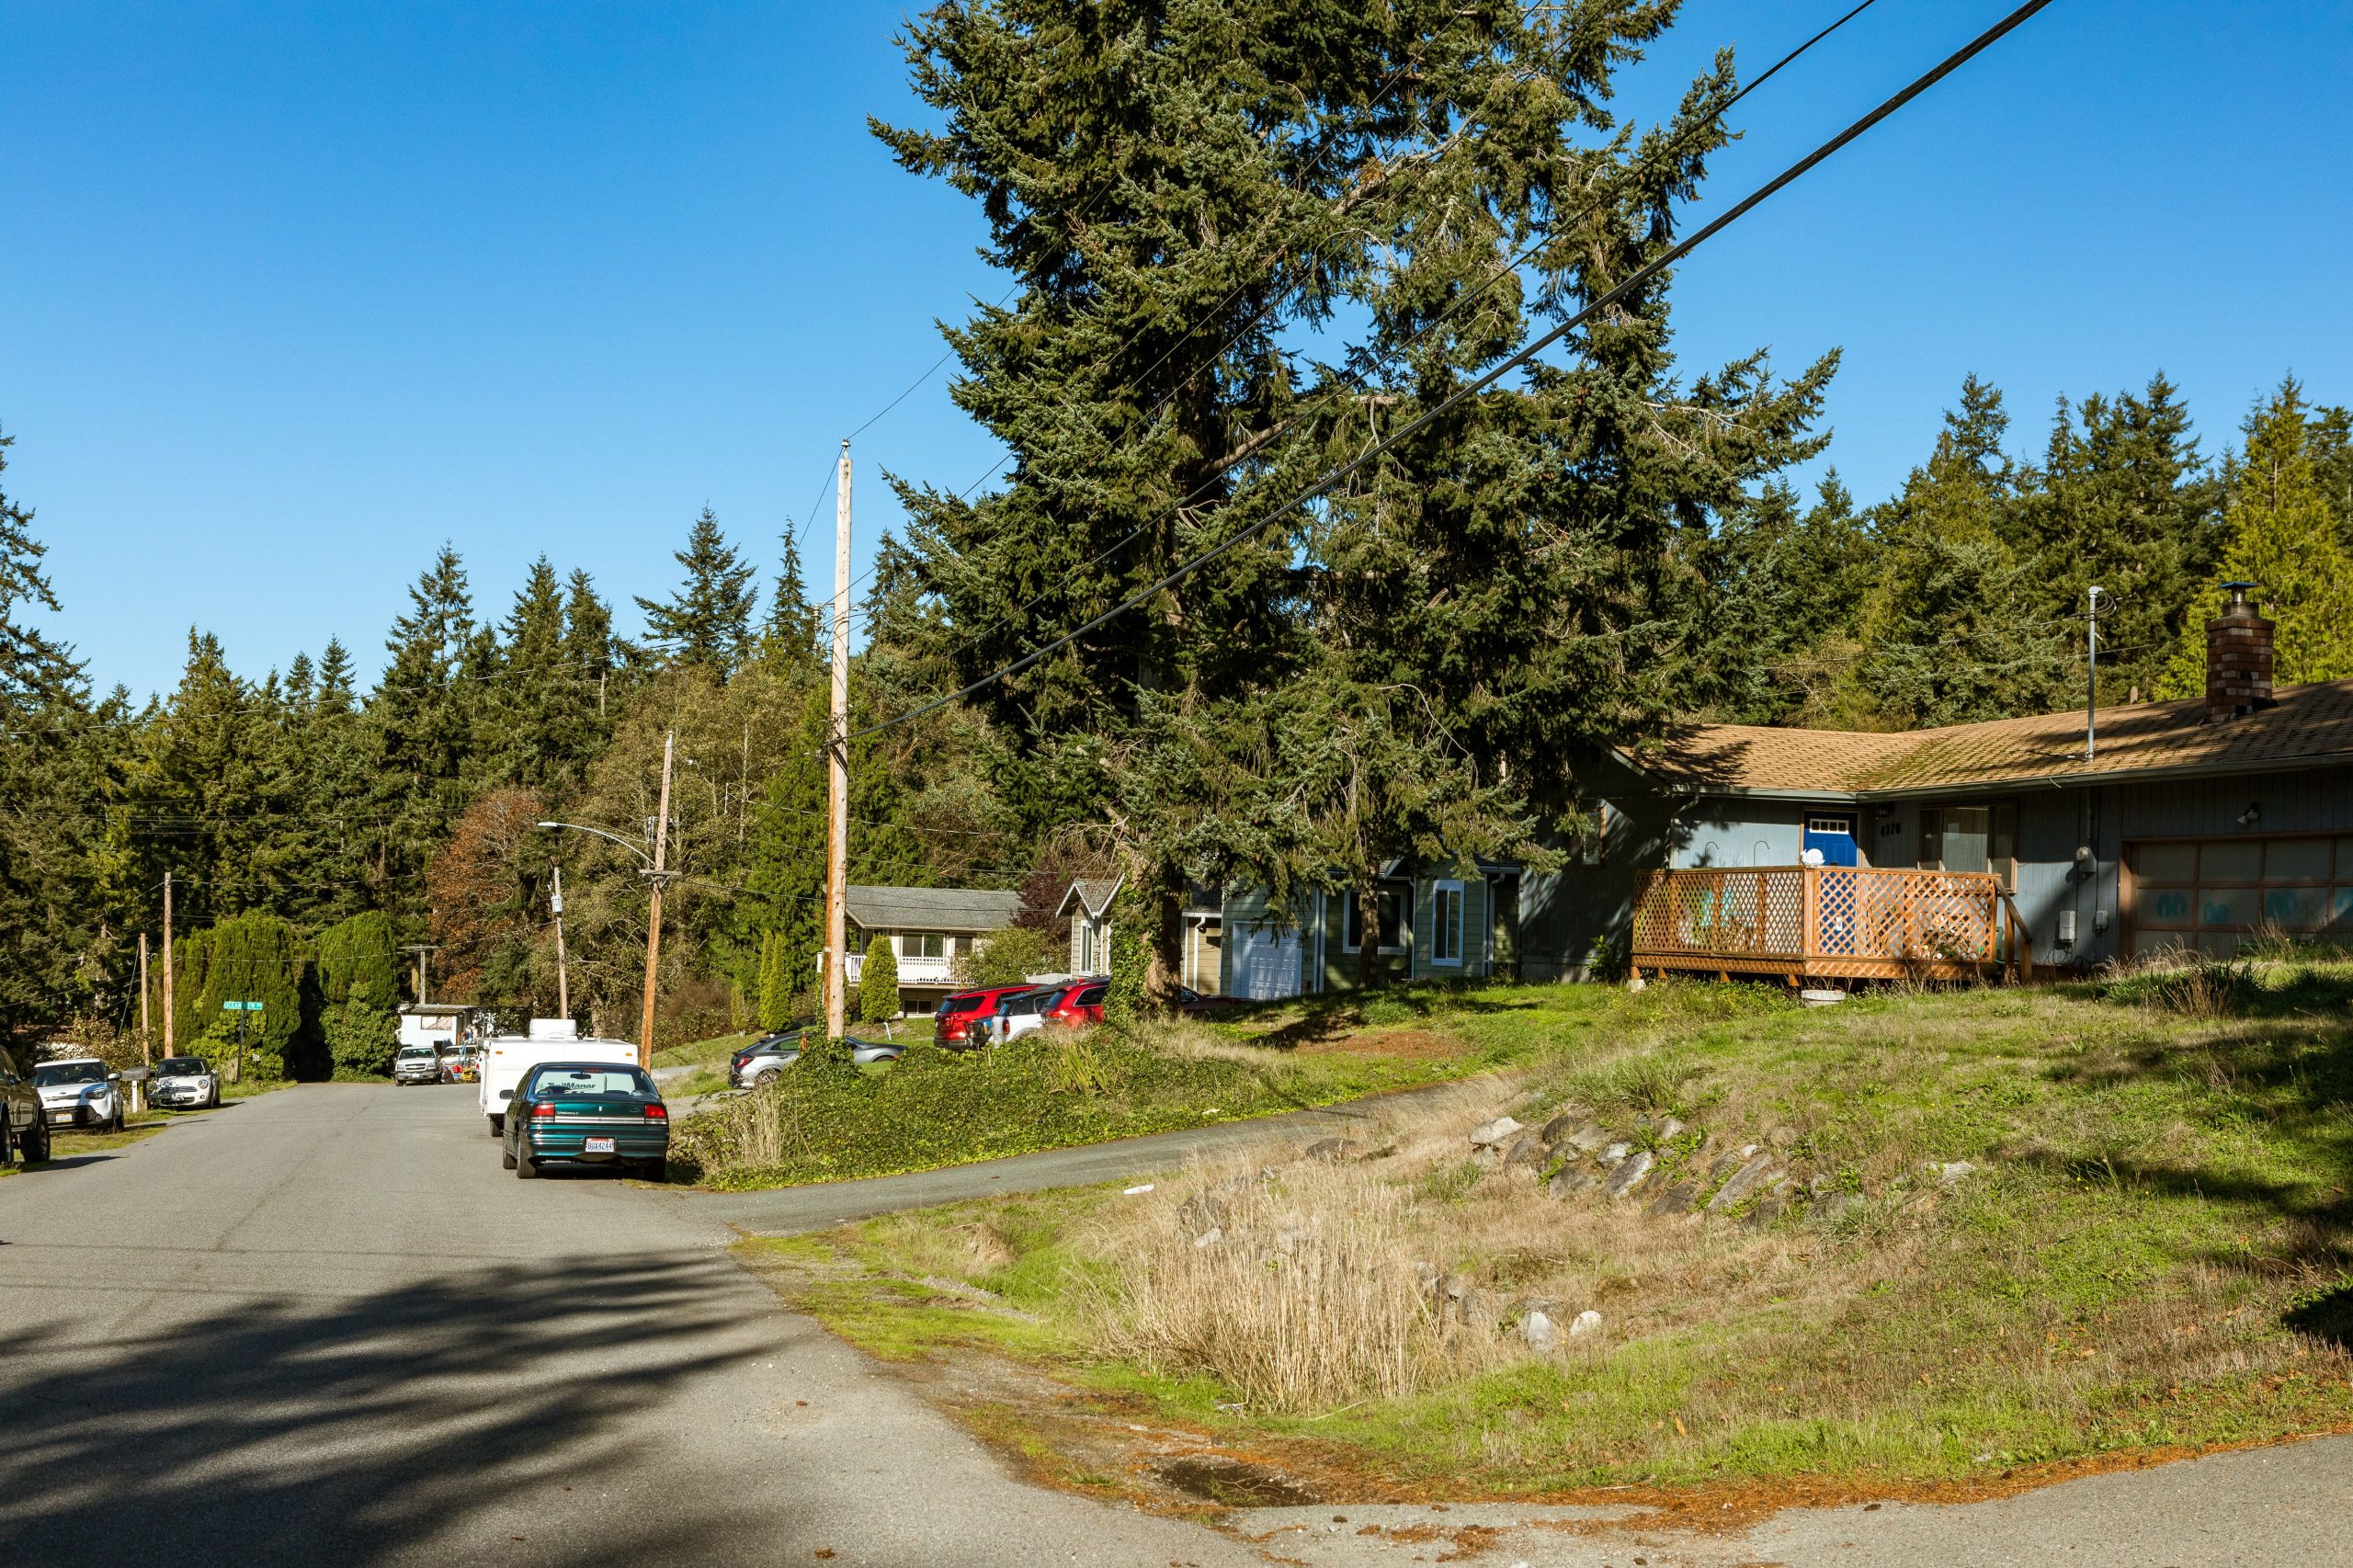 North Whidbey, Neighborhood, Street view, Northgate Terrace, Whidbey Island, Windermere Real Estate